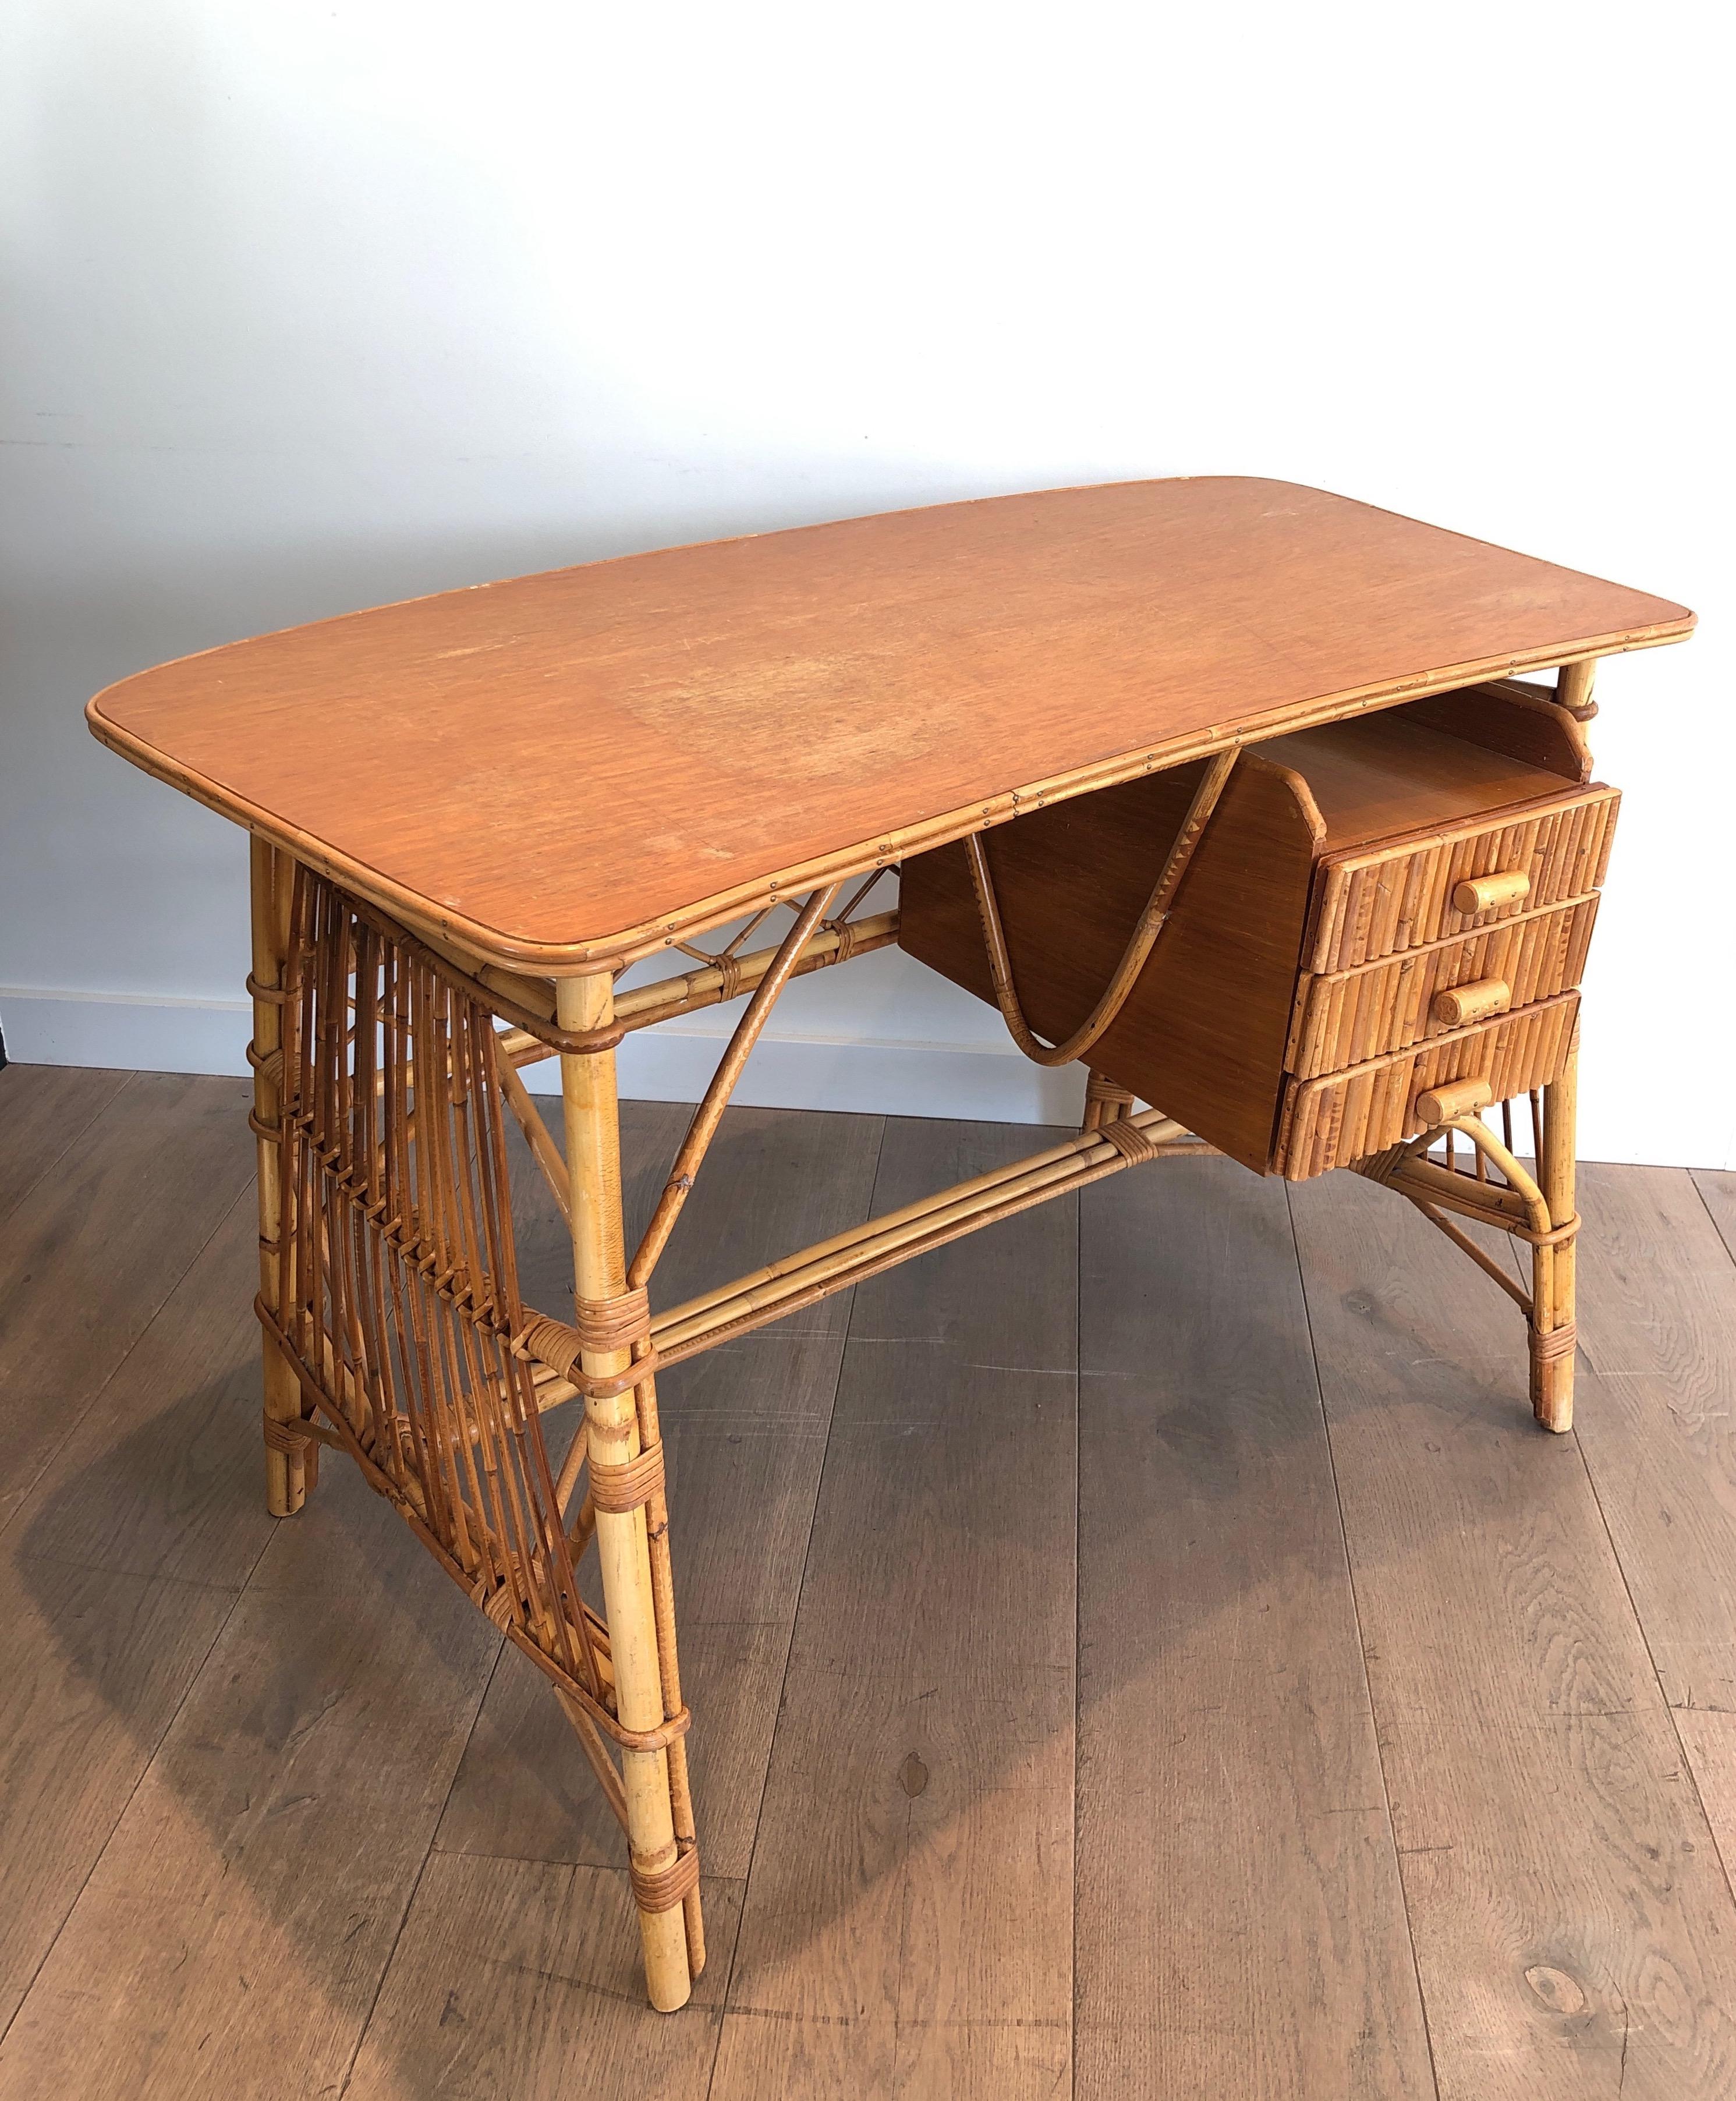 Mid-Century Modern Attributed to Audoux Minet, Rattan Desk with Drawers, French, Circa 1970 For Sale